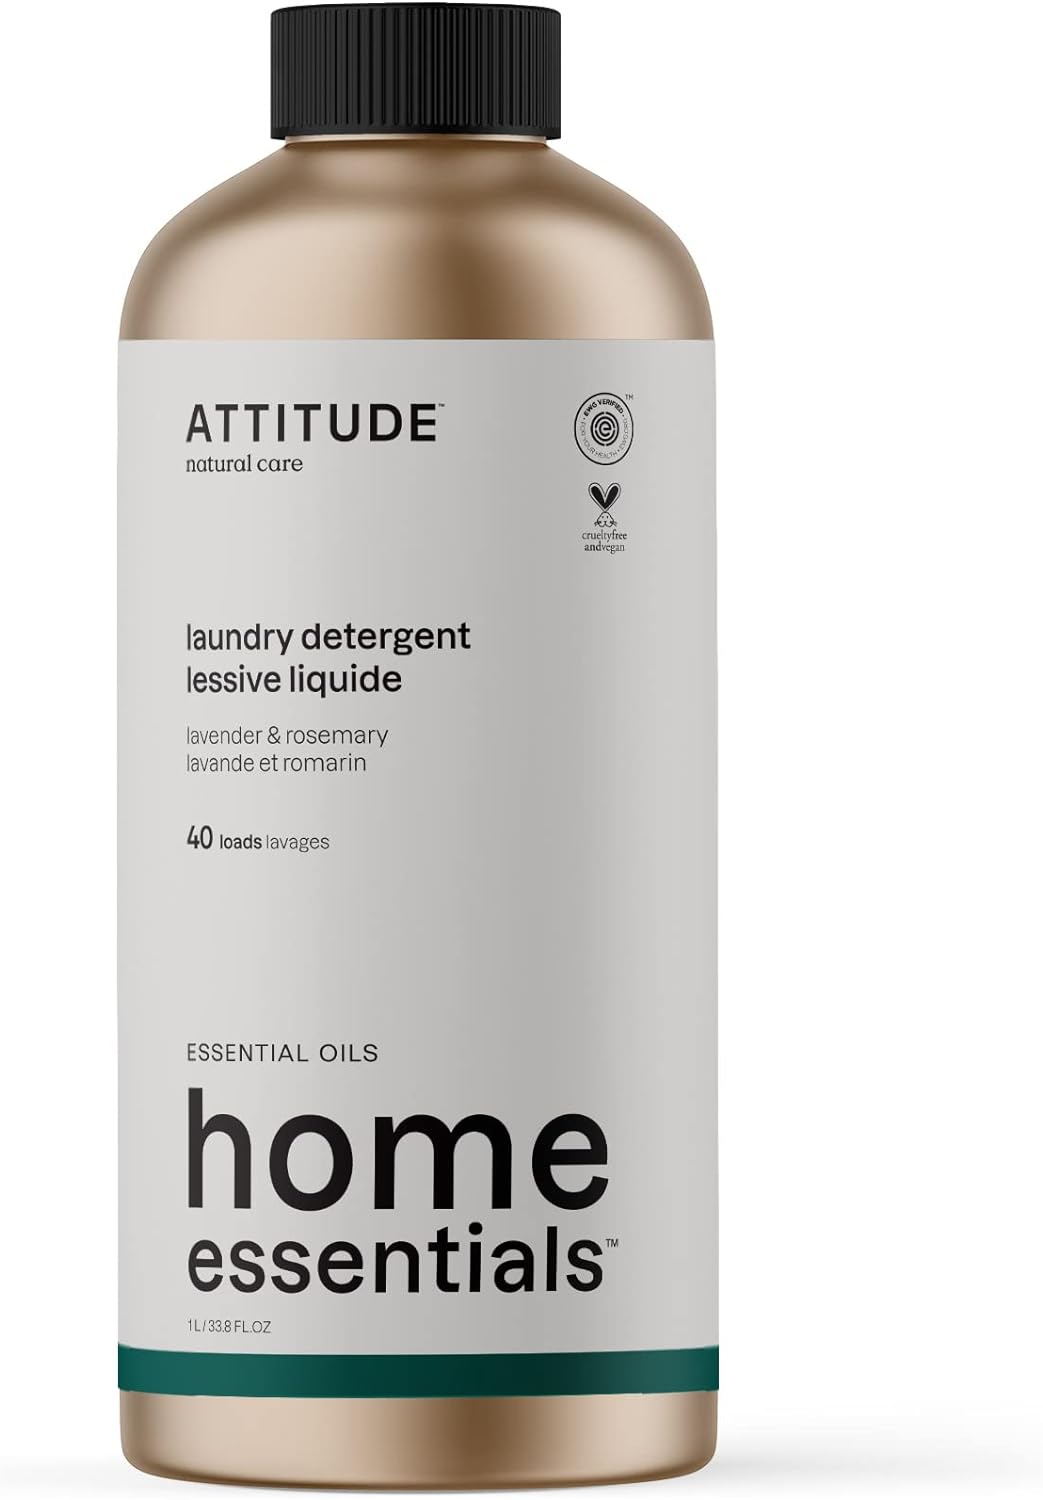 ATTITUDE Laundry Detergent with Essential Oils, EWG Verified, Vegan, Plant and Mineral-Based Ingredients, HE, Refillable Aluminum Bottle, 40 Loads, Lavender and Rosemary, 33.8 Fl Oz